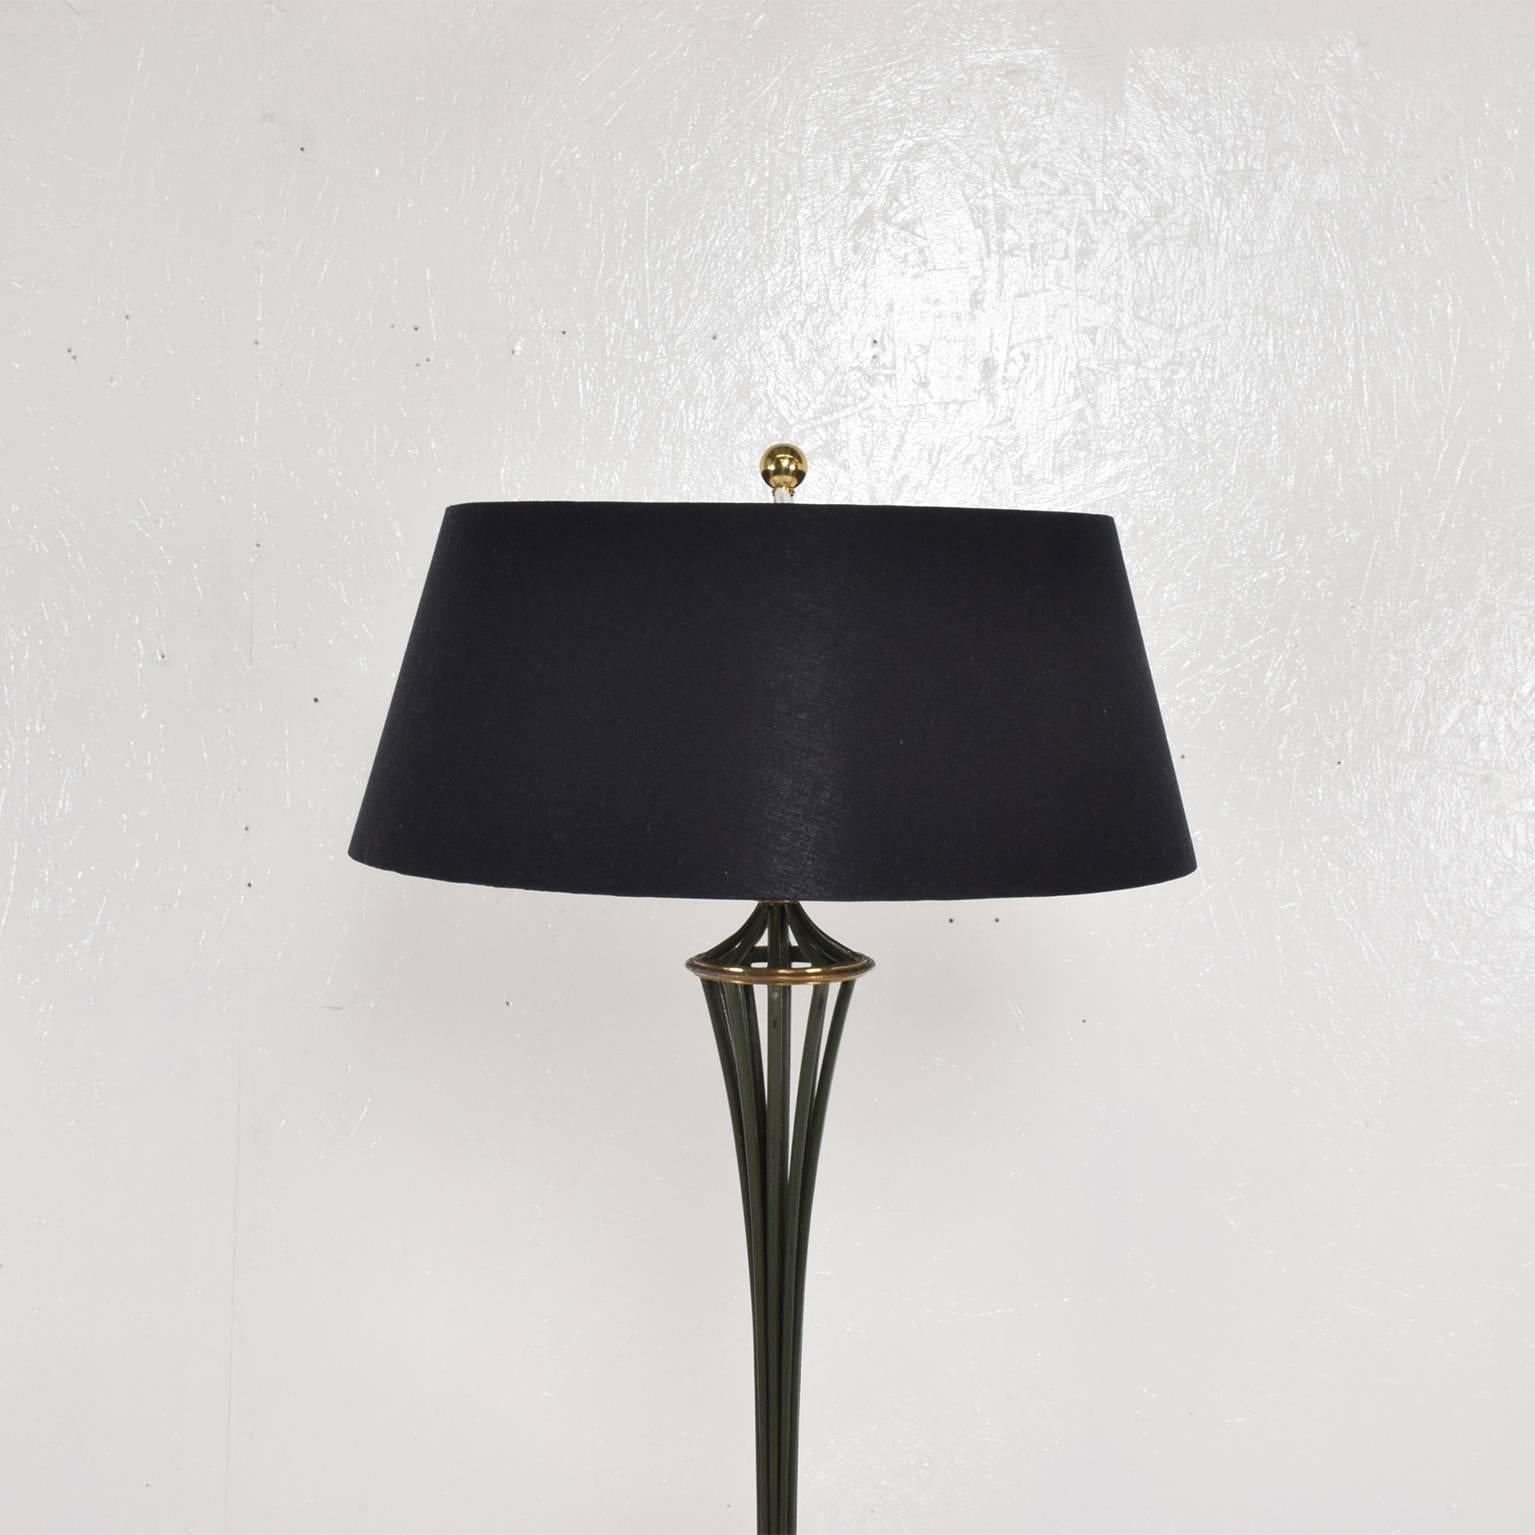 AMBIANIC presents:
Elegant Floor Lamp with built in Round Scalloped Table in Iron and Brass.
Attributed to design of Arturo Pani.
Handcrafted by Talleres Chacon in Mexico City,1949
Dimensions: 63 height x 22.25 diameter inches.
Original Unrestored